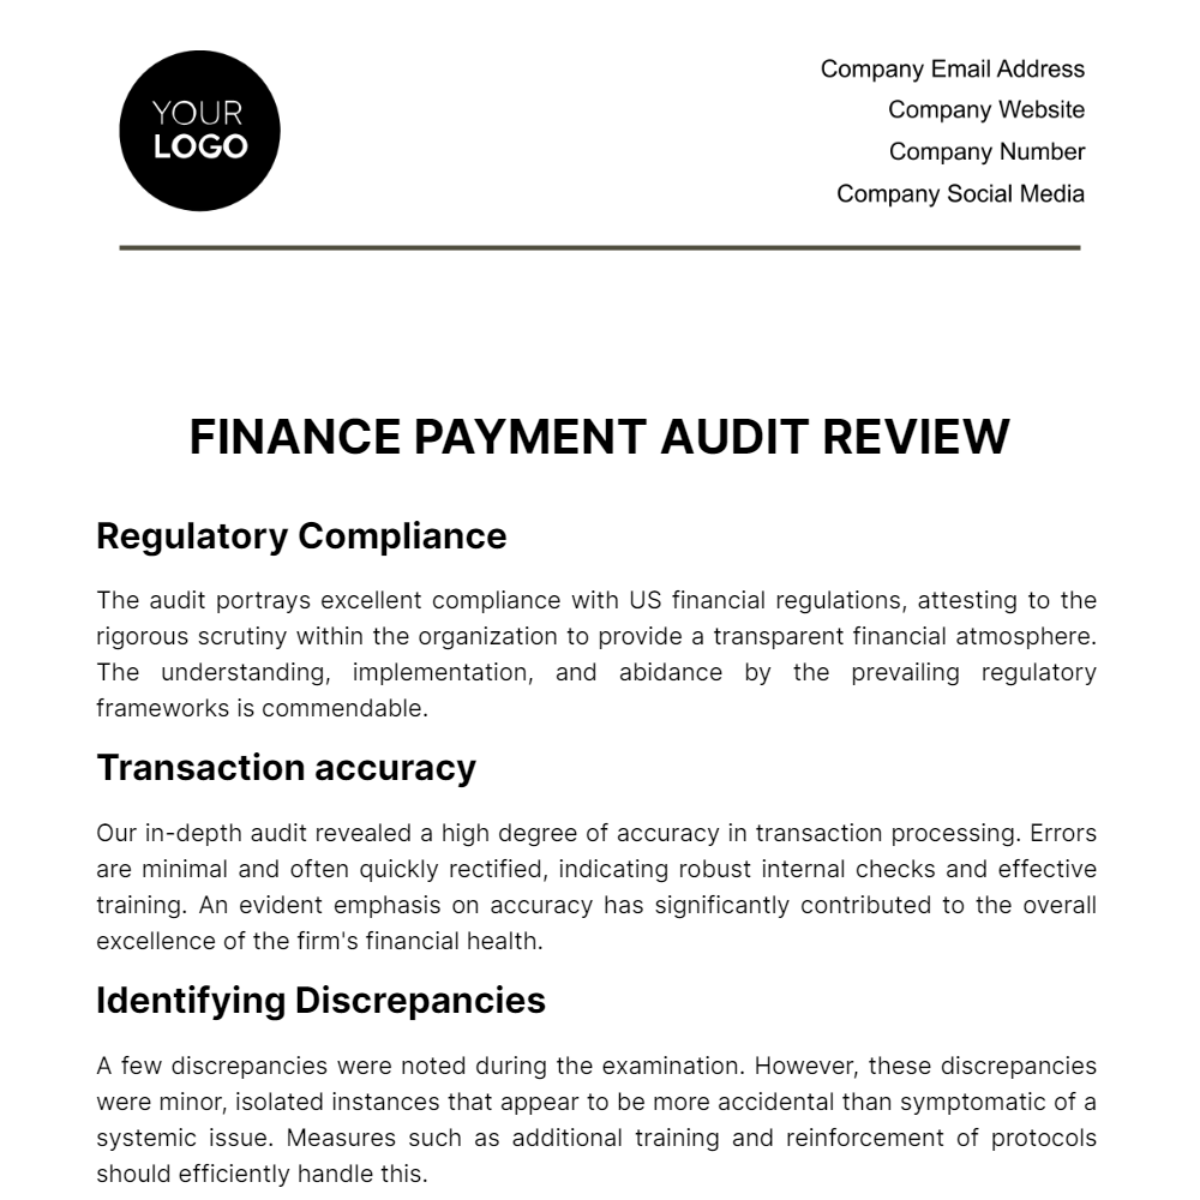 Finance Payment Audit Review Template